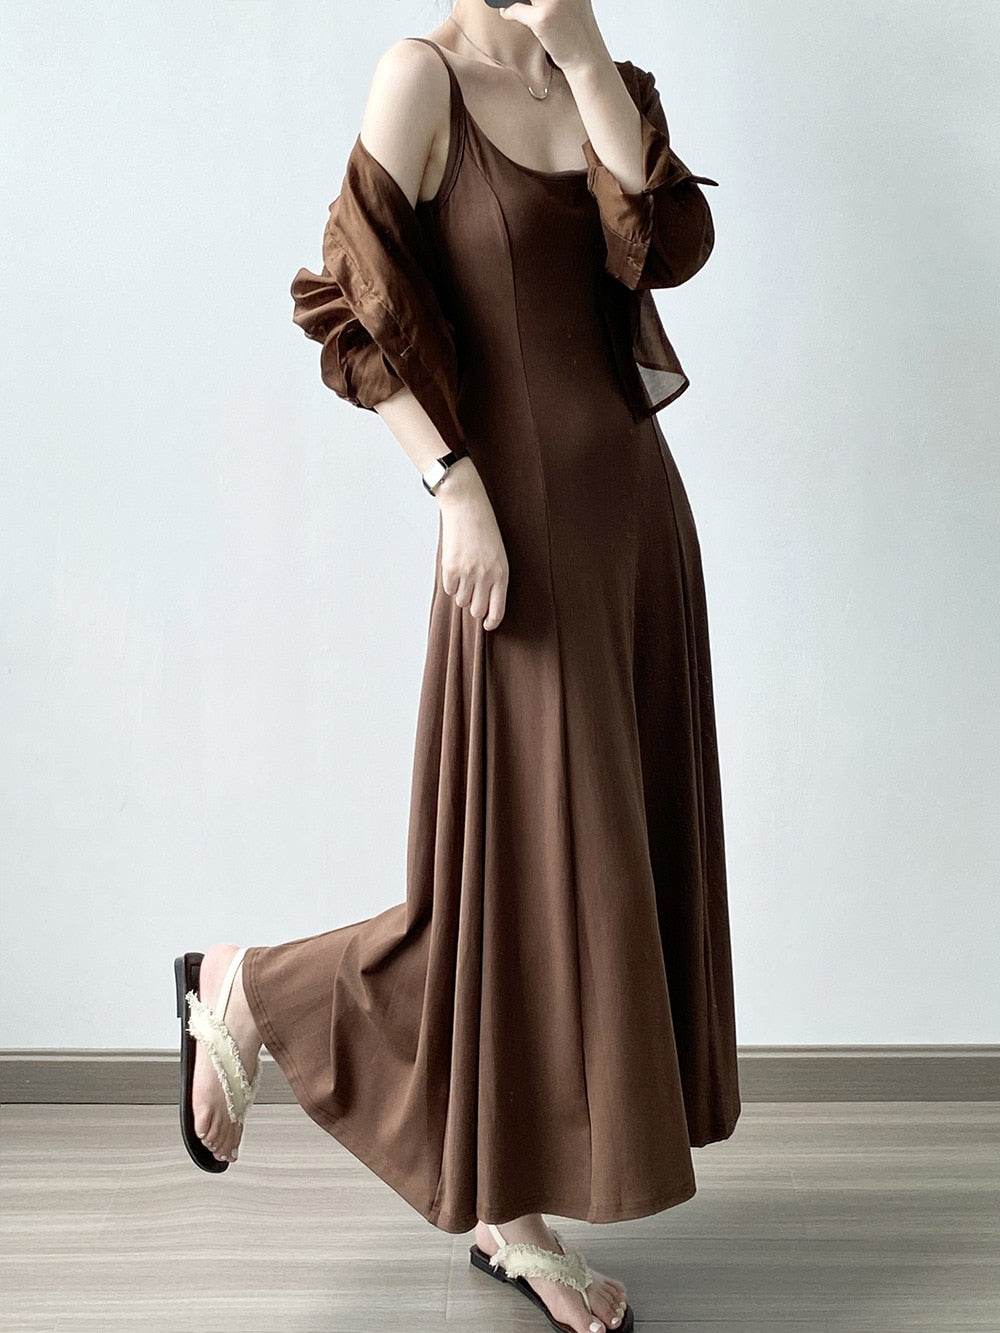 [Korean Style] Solid Color Lightly Padded Casual Maxi A-line Dress